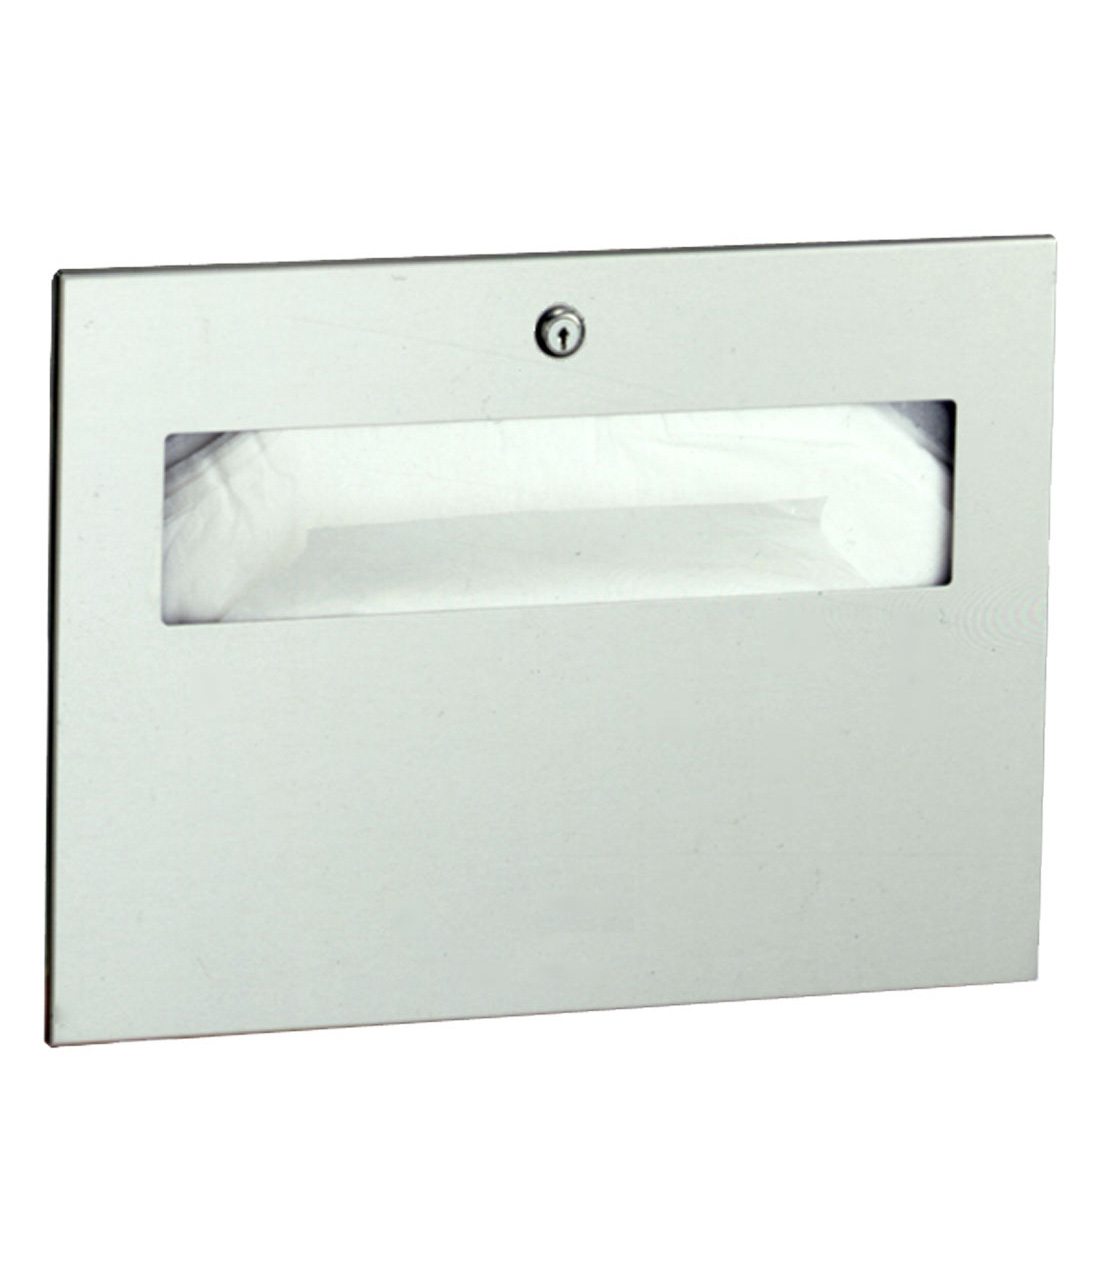 Recessed Coverall Toilet Seat-Cover Dispenser - (Model #: tsc-8)-image